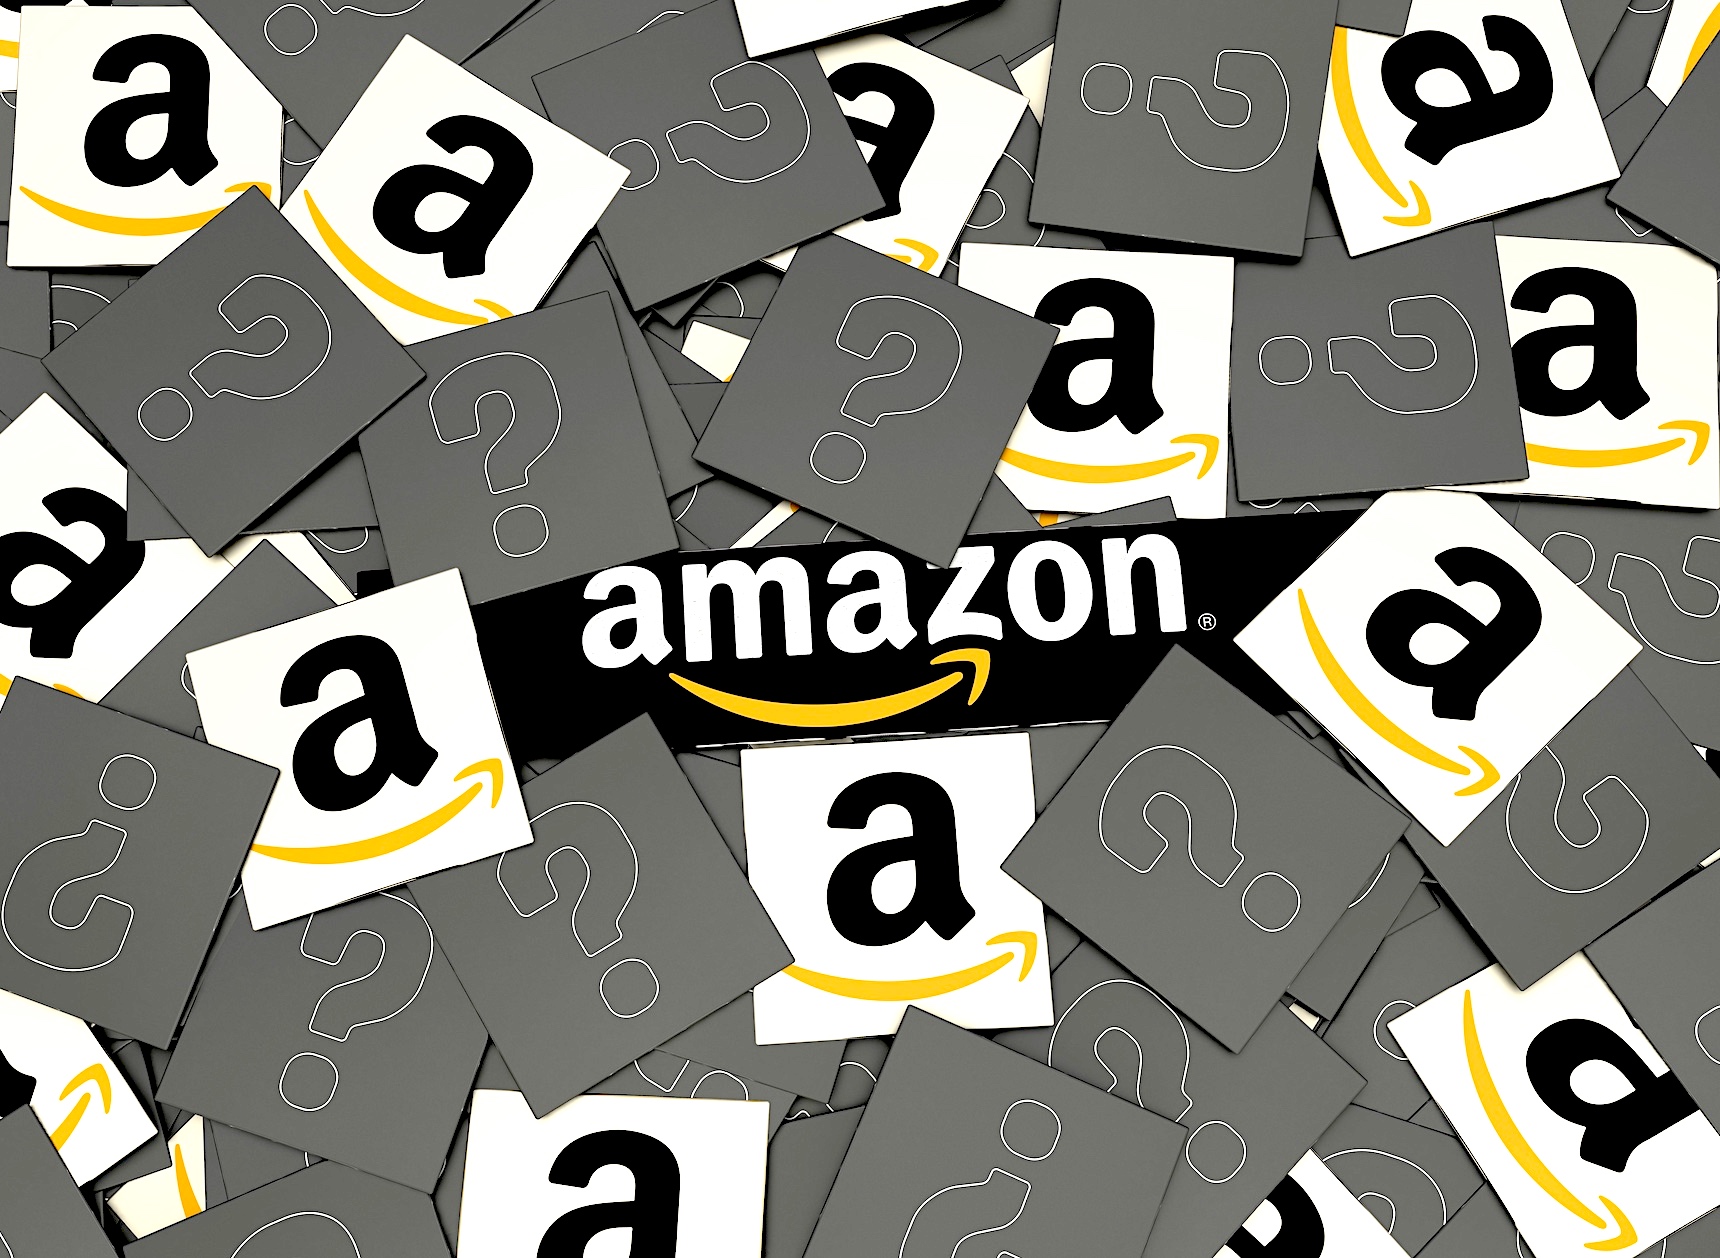 What could disrupt Amazon?